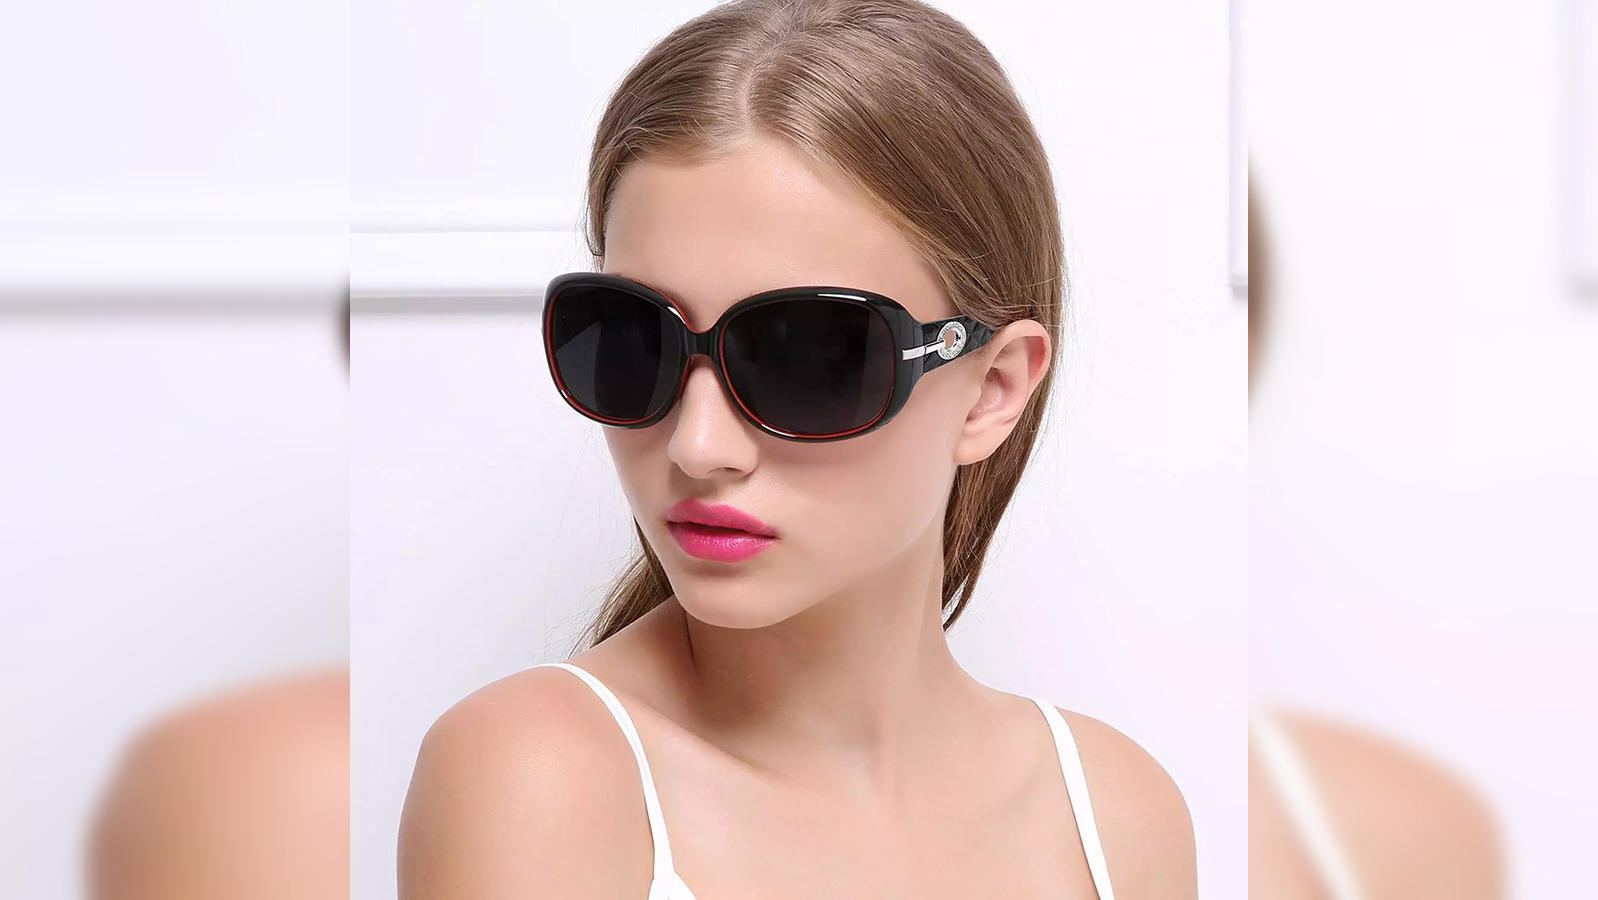 Buy Trendy Sunglasses Online in India at Lowest Price